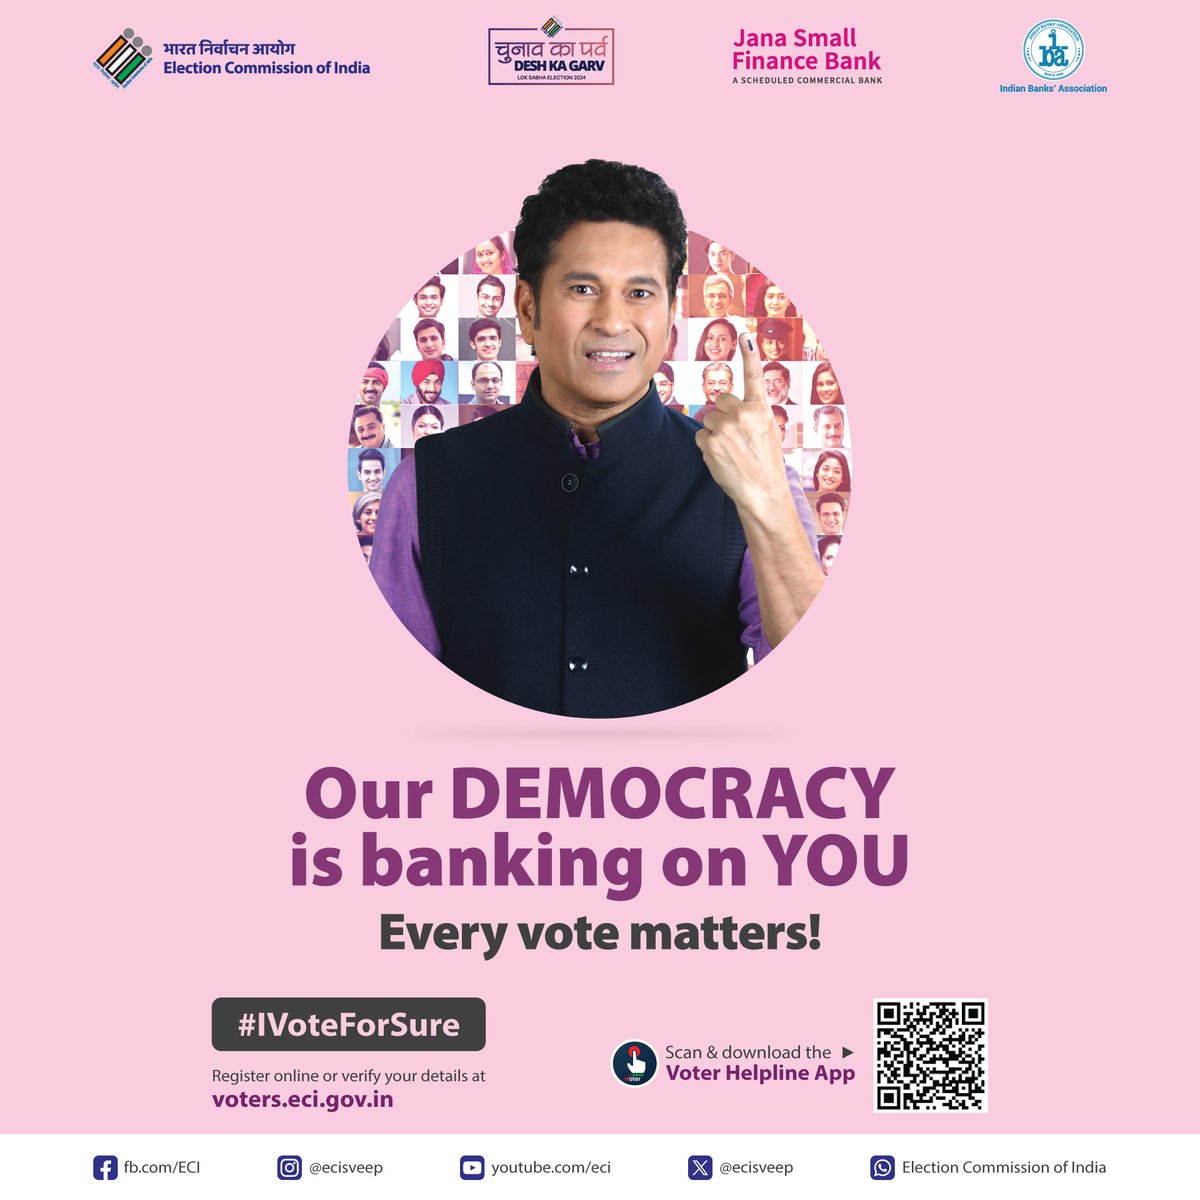 Be the change you want to see. Vote for a better future. #IVoteforSure #JanaBank